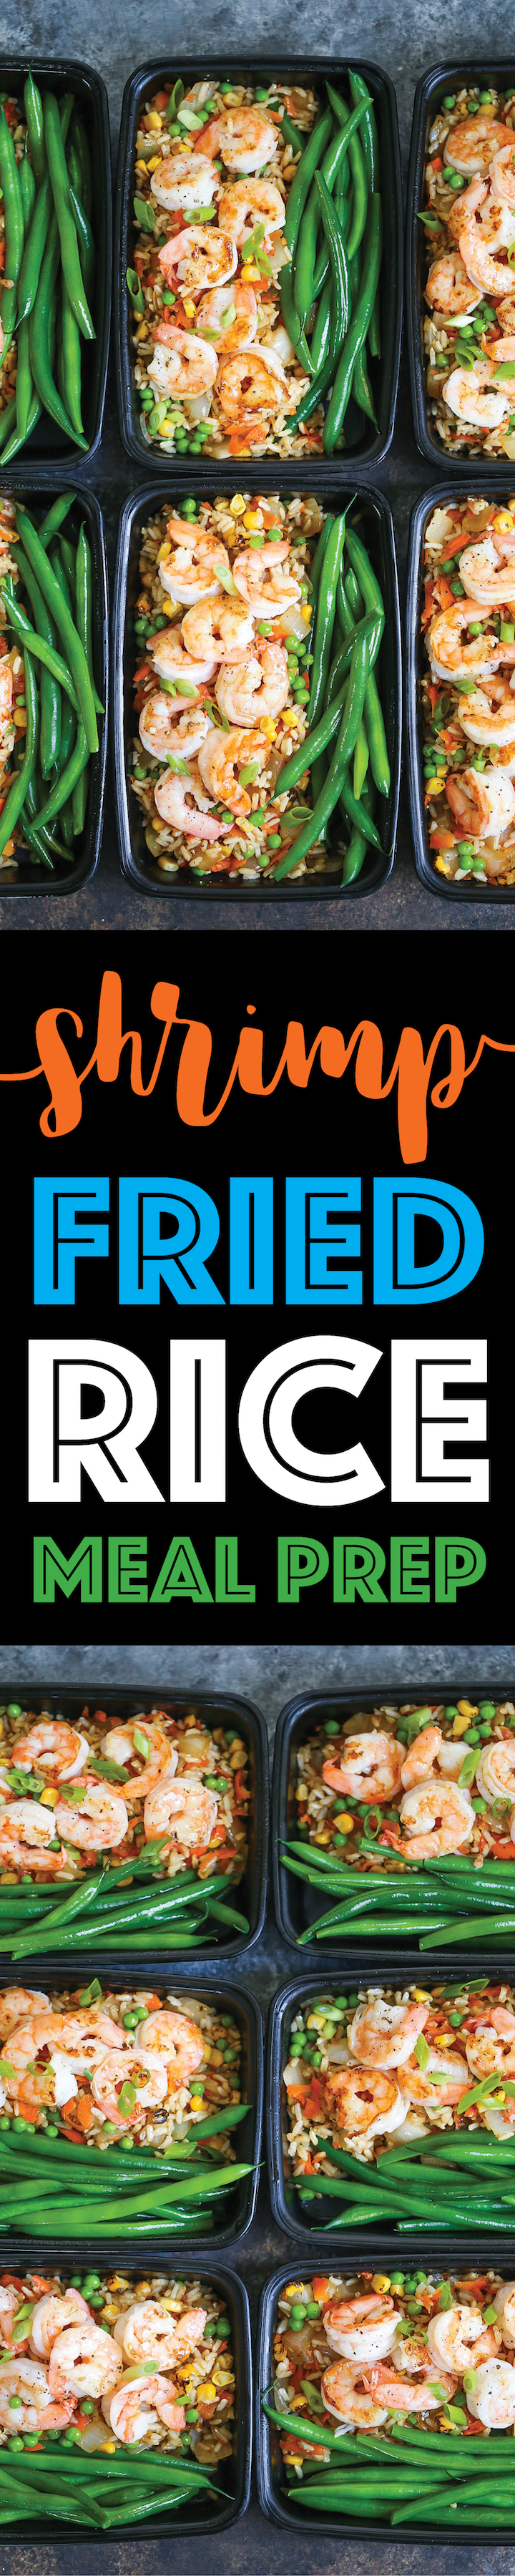 Shrimp Fried Rice Meal Prep - No need to order takeout anymore! Your favorite fried rice dish is packed right into meal prep boxes for the entire week!